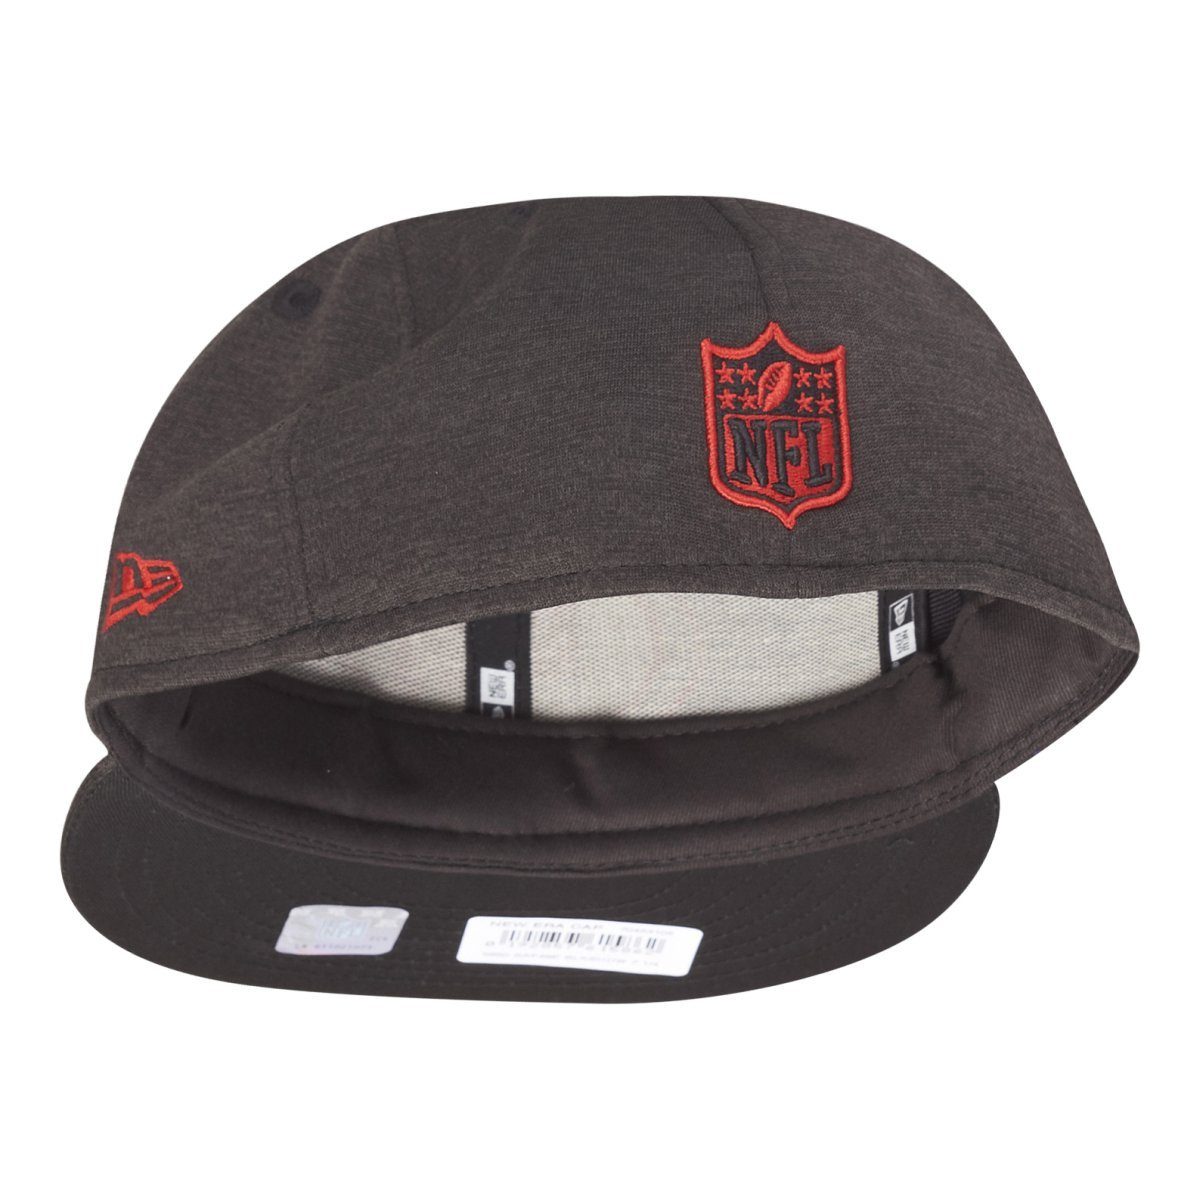 Cap Era New TECH Francisco San Fitted 49ers SHADOW NFL 59Fifty